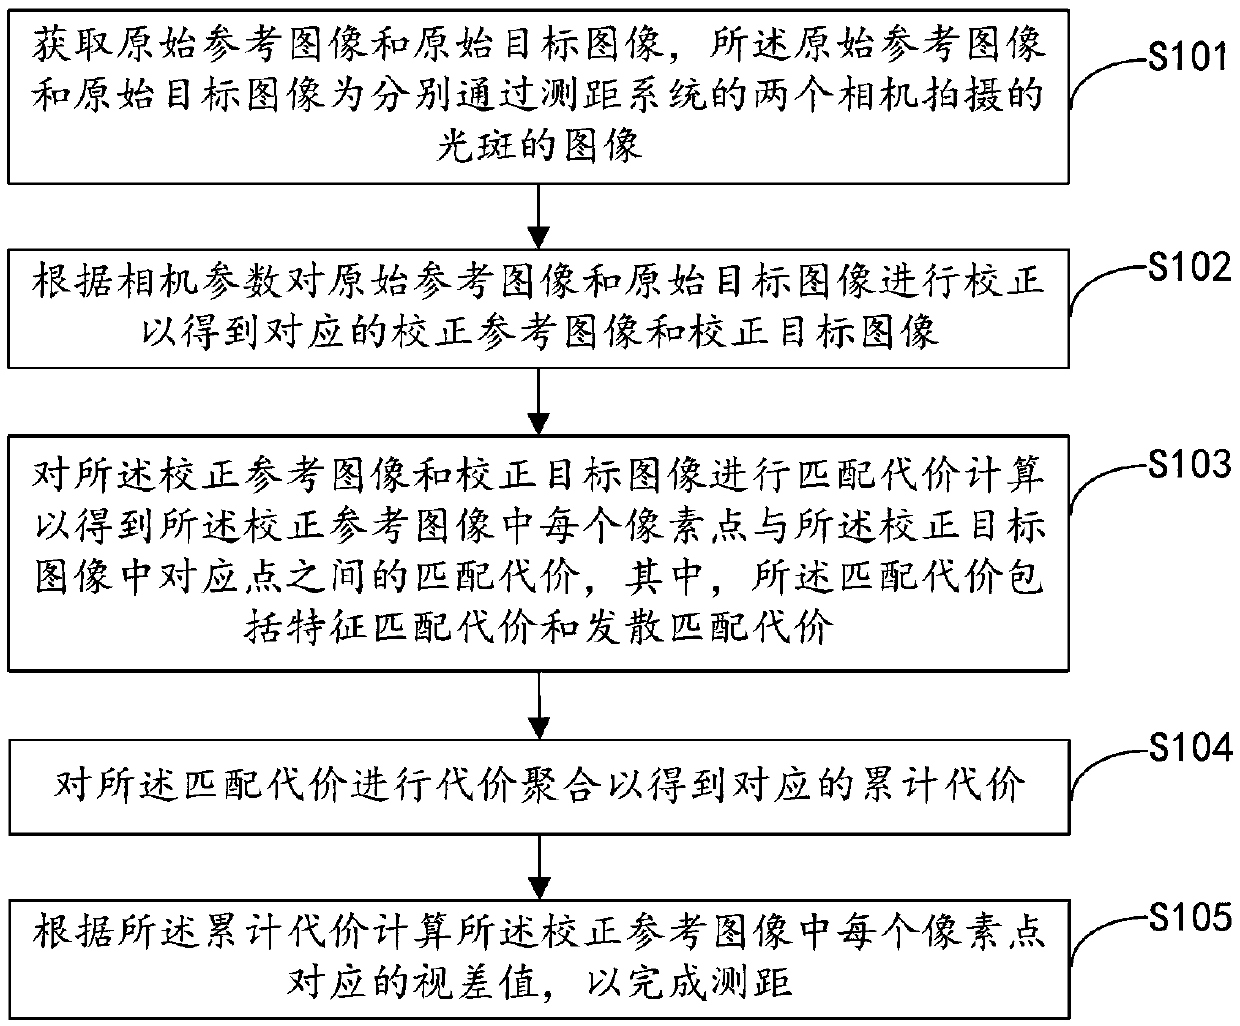 Binocular stereoscopic vision based distance measuring method and distance measuring system